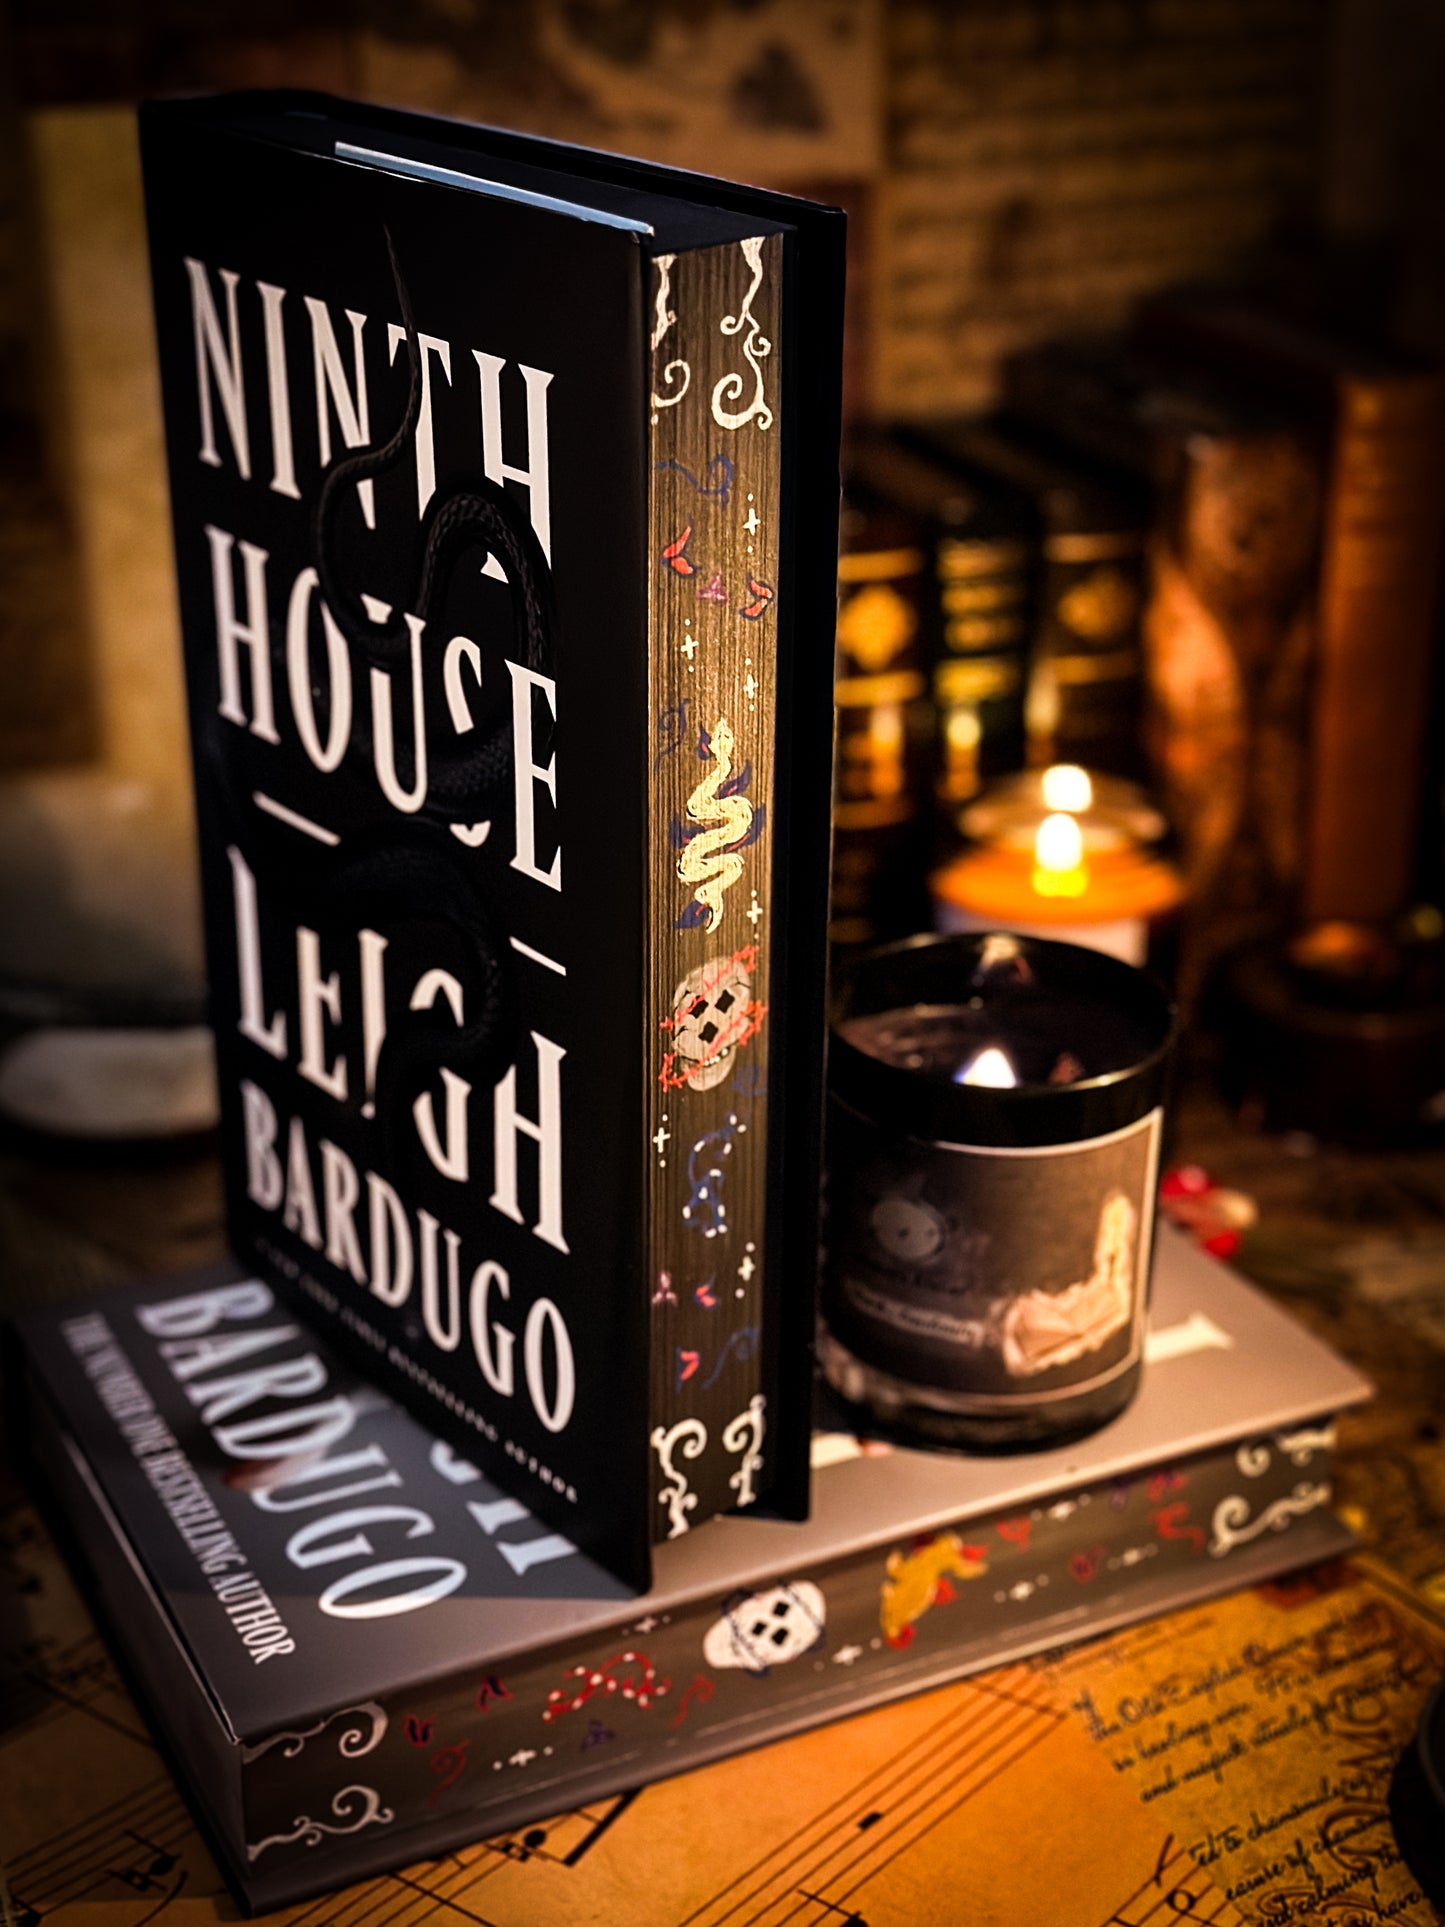 Ninth House & Hell Bent HAND-PAINTED EDGES